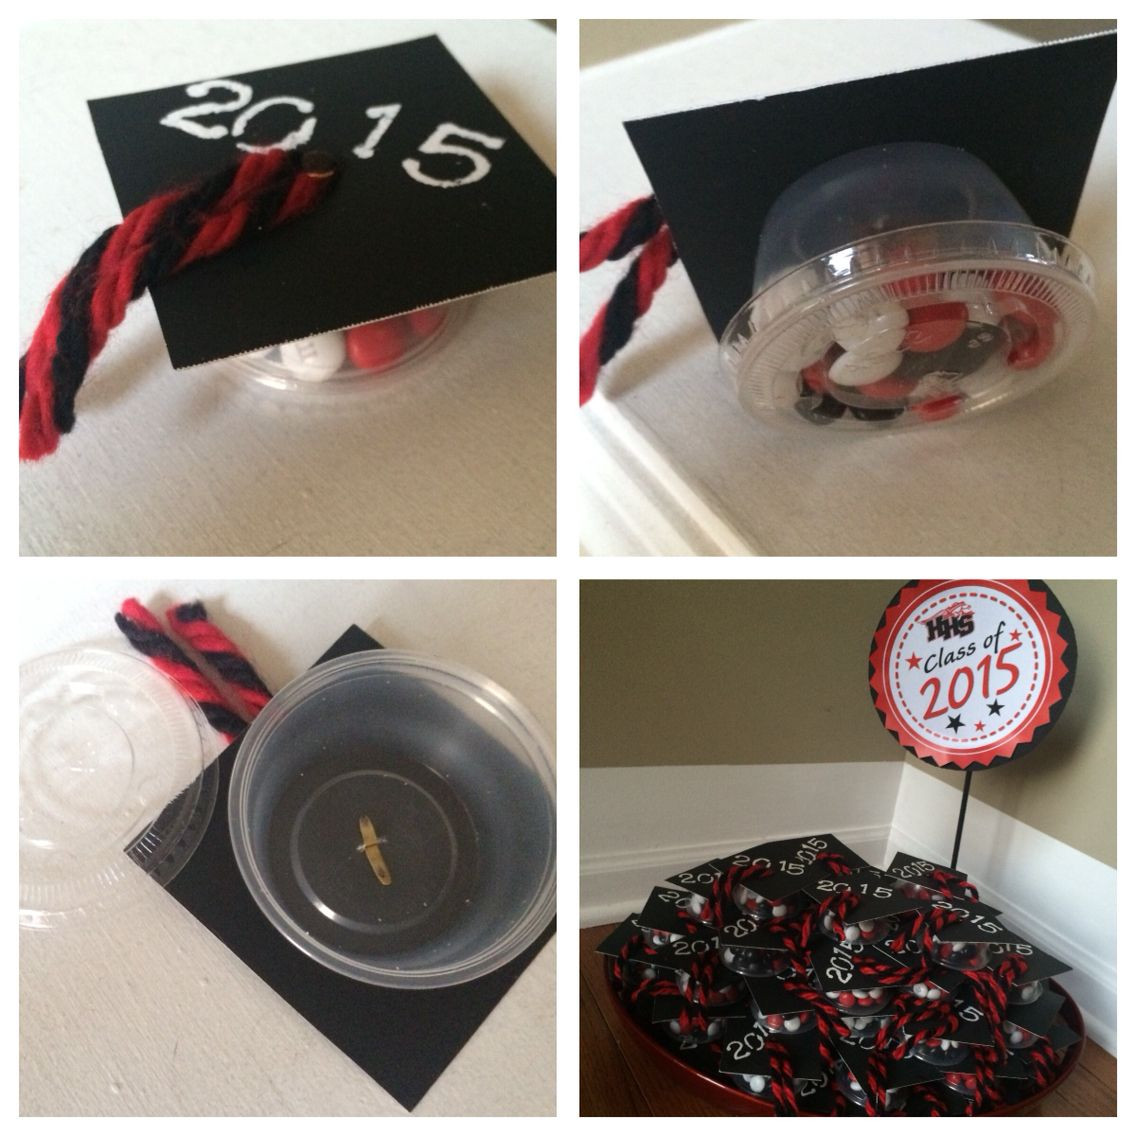 Graduation Party Favor Ideas Diy
 Graduation Party Favors I made these using 3"x3" black